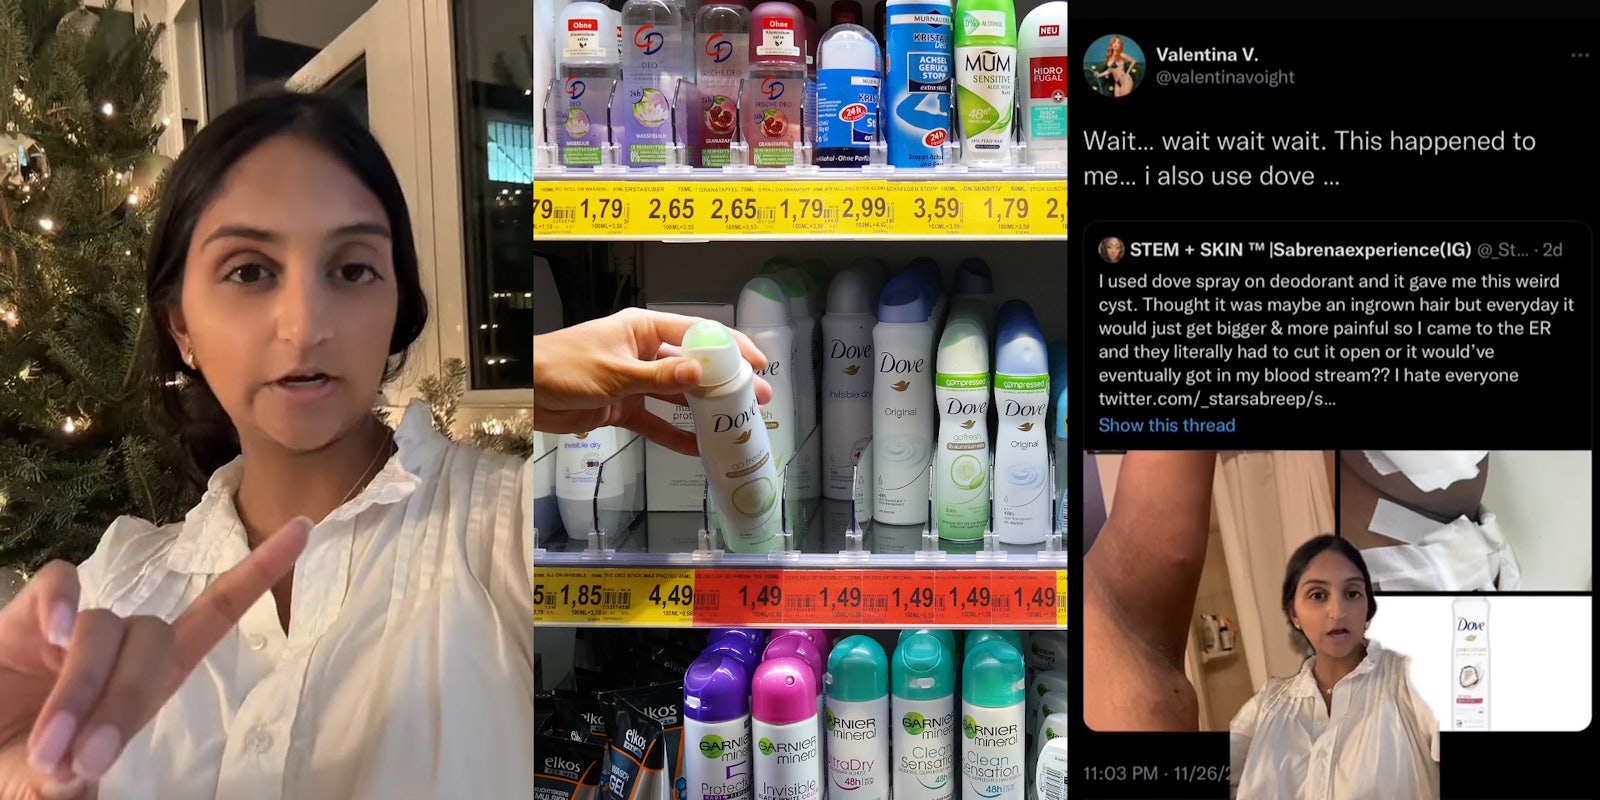 woman speaking with finger pointing (l) person grabbing Dove spray deodorant from store shelf (c) woman greenscreen TikTok over Tweet by Valentina V. 'wait... wait wait wait. This happened to me... i also use dove...' with Tweet by Sabrenaexperience 'I used dove spray deodorant and it gave me this weird cyst. Thought it was maybe an ingrown hair but everyday it would just get bigger & more painful so I came to the ER and they literally had to cut it open or it would've eventually got in my blood stream?? I hate everyone' with images of arm with cyst and Dove deodorant (r)